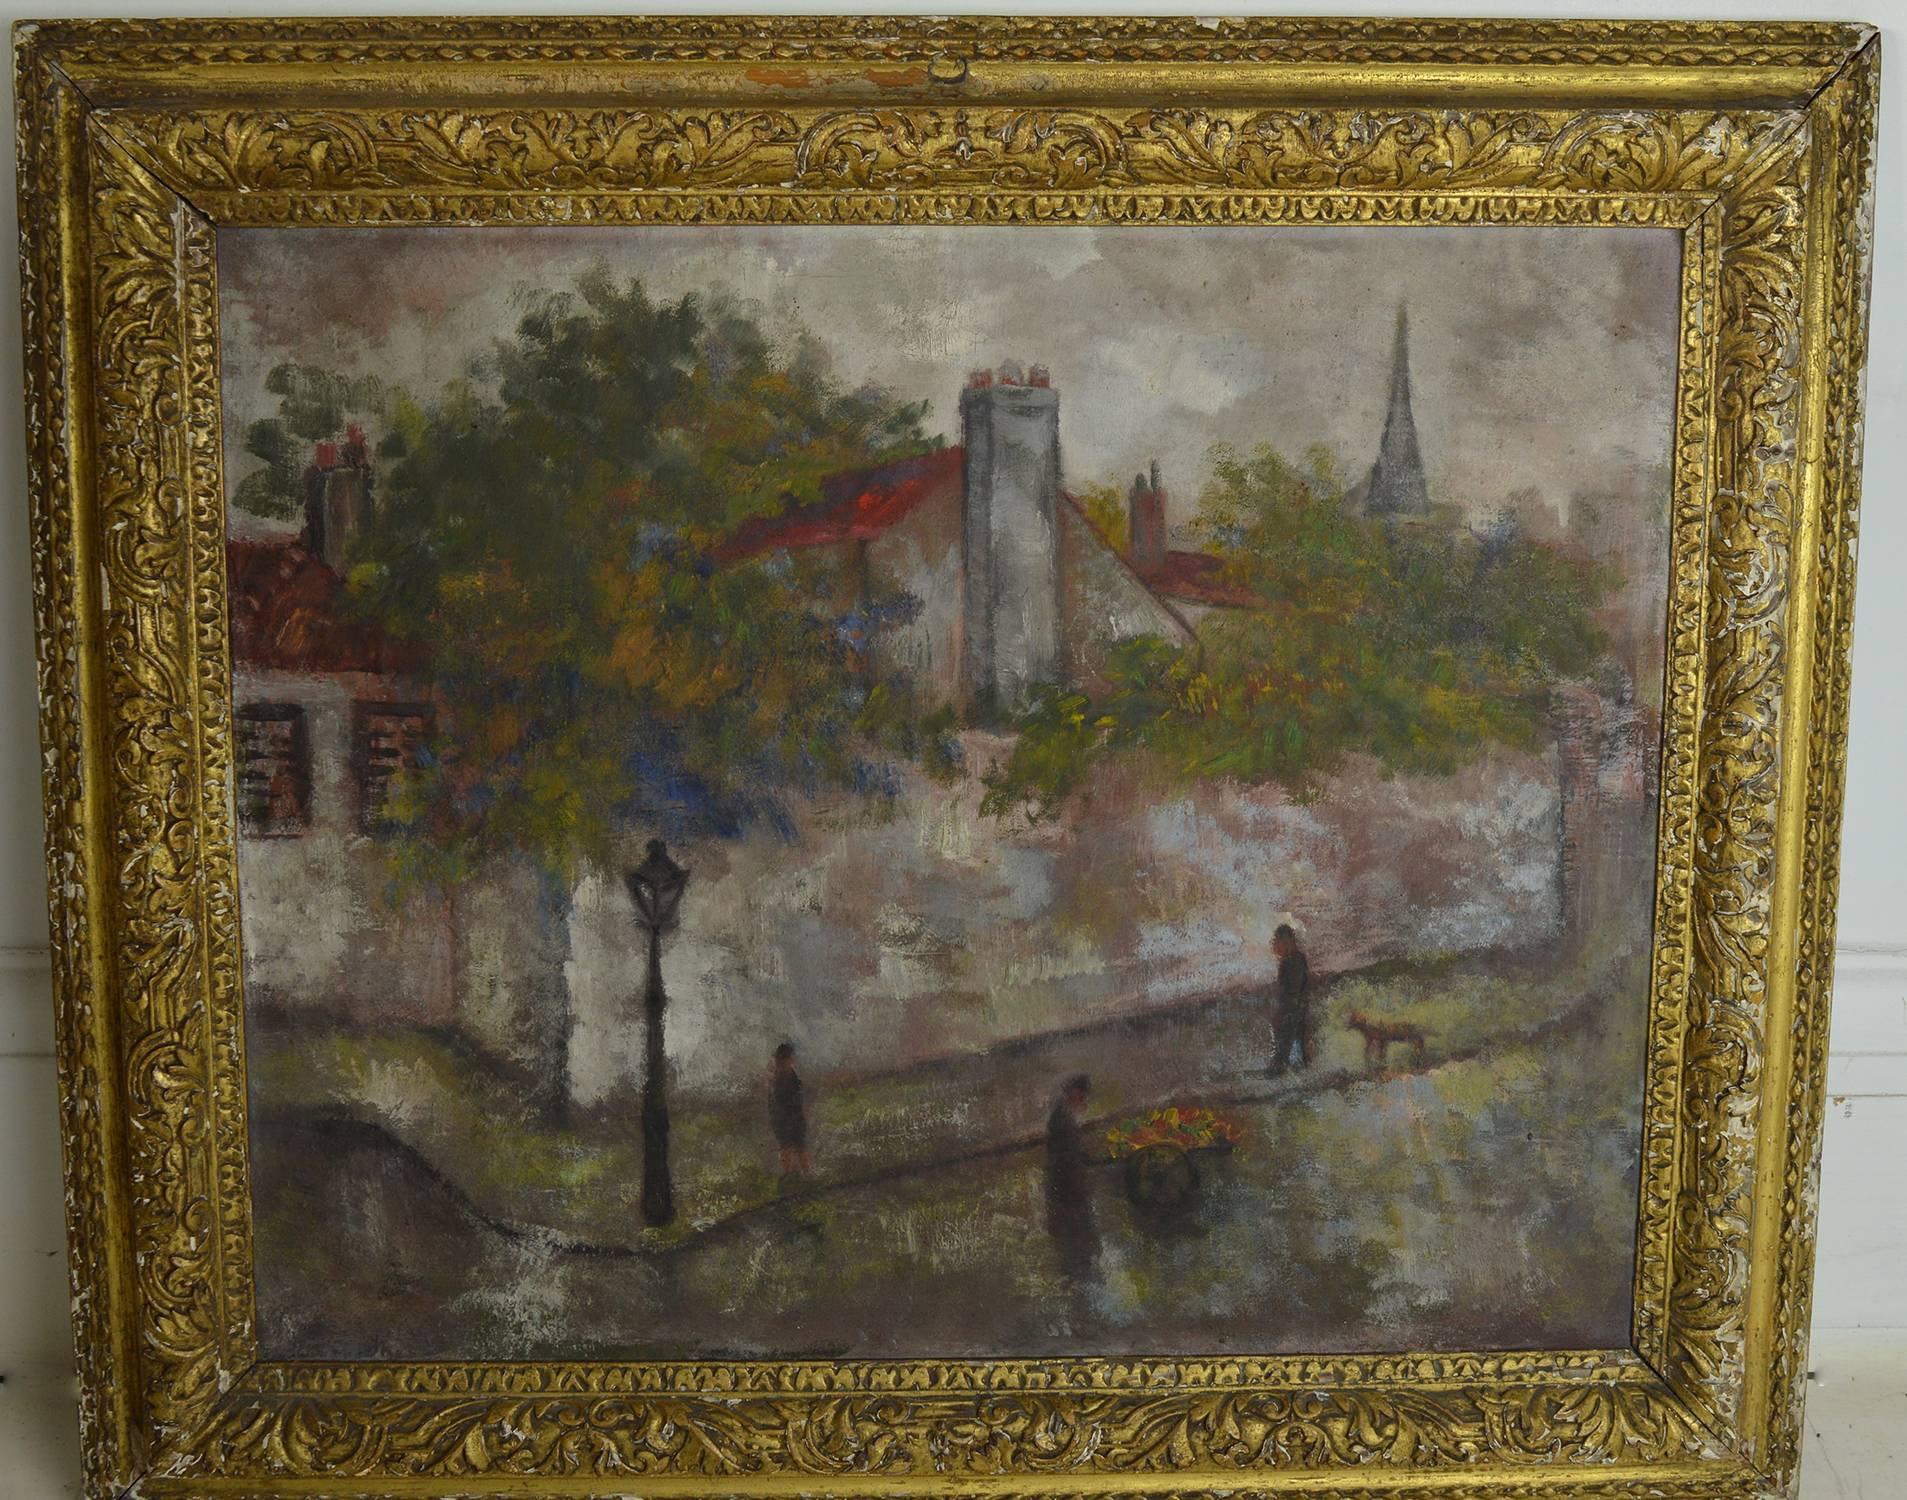 Wonderful post-impressionist oil painting of a Paris street scene by a good artist, Isaac Lichtenstein. possibly Montmartre district.

Oil on canvas. No title.

Signed and dated 1924 on verso.

Also an interesting inventory mark on stretcher